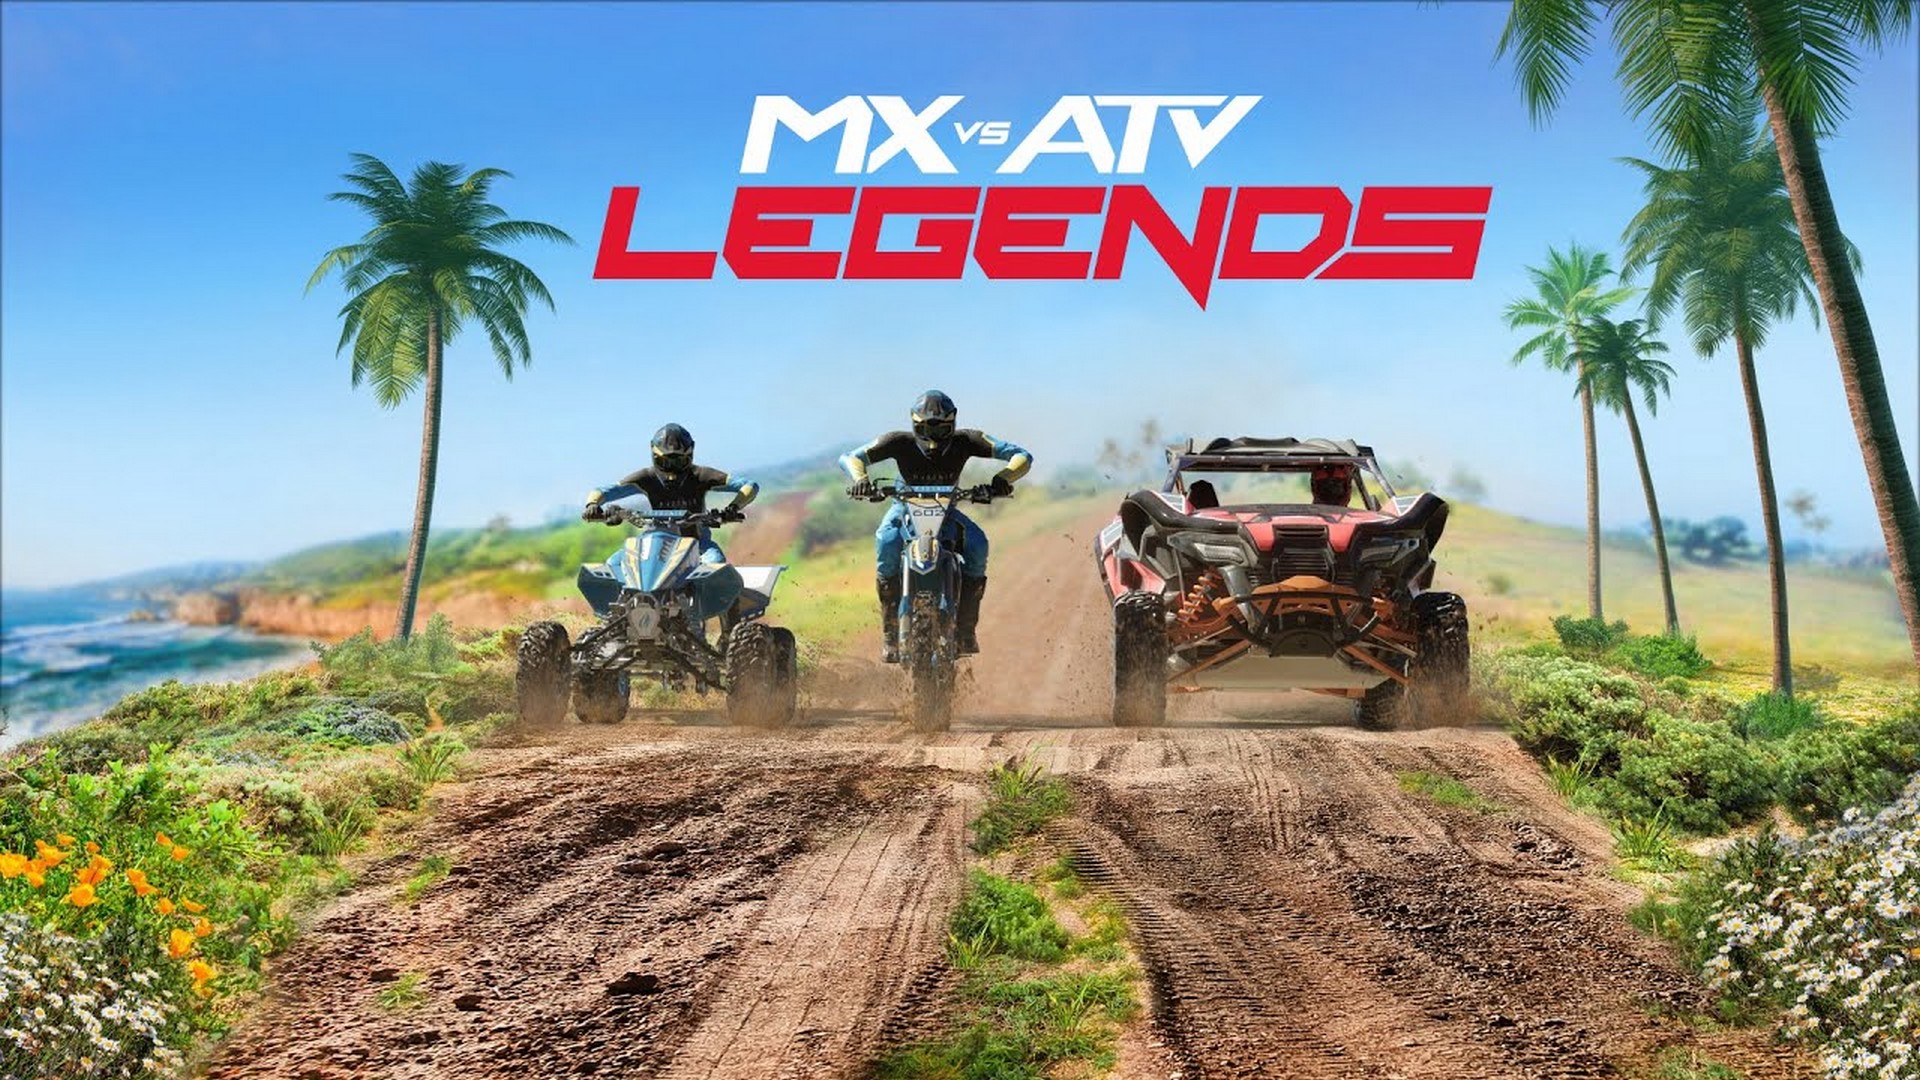 MX vs ATV Legends Boxed Edition Is Out Now